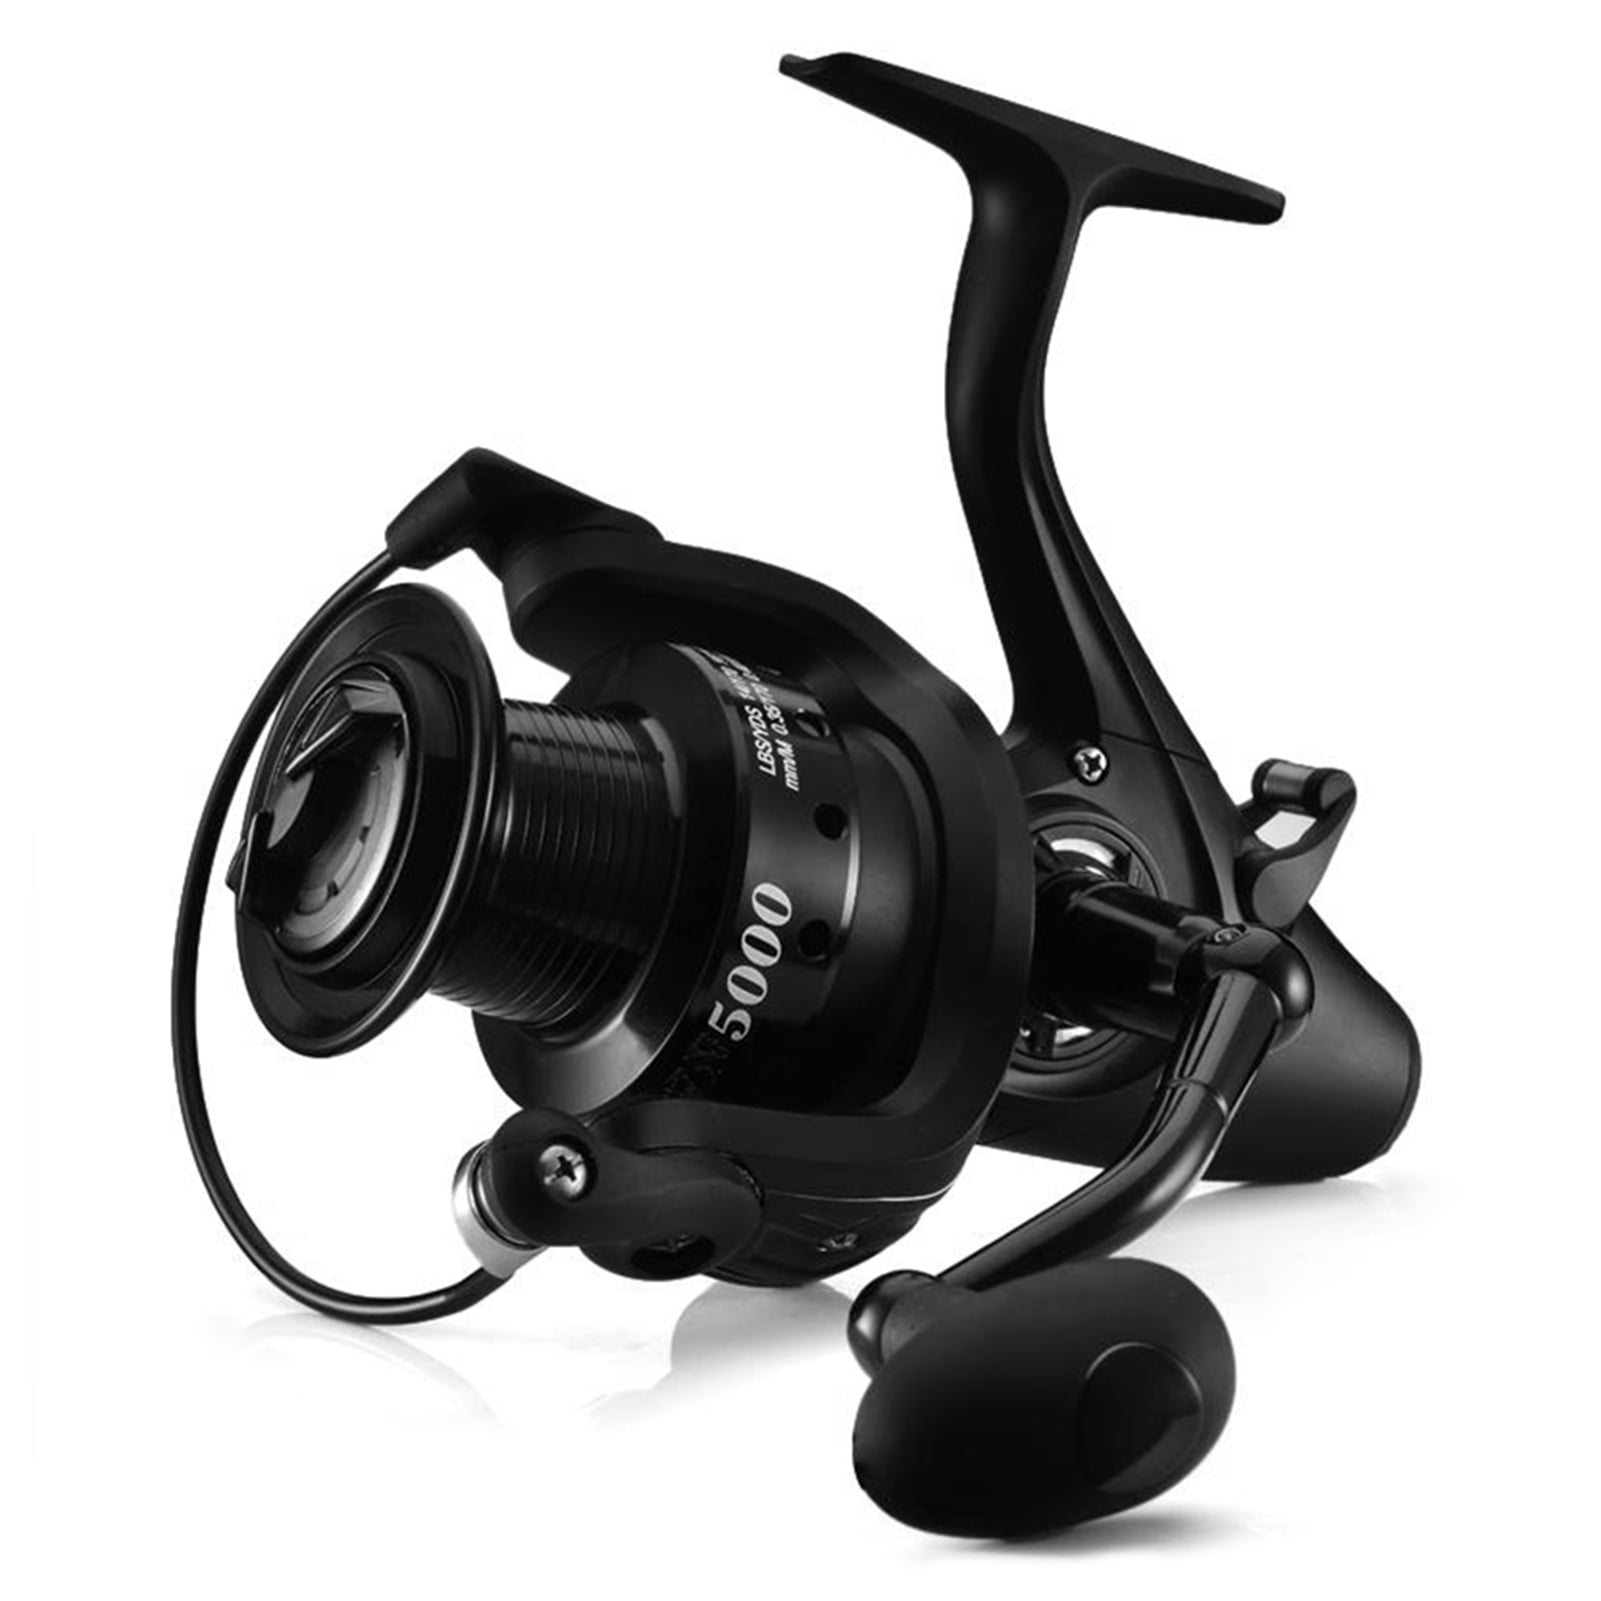 12+1 Bb Reel with Front and Rear Double Drag Carp Fishing Reel Left Right Interchangeable for Saltwater Freshwater, Size: 9000